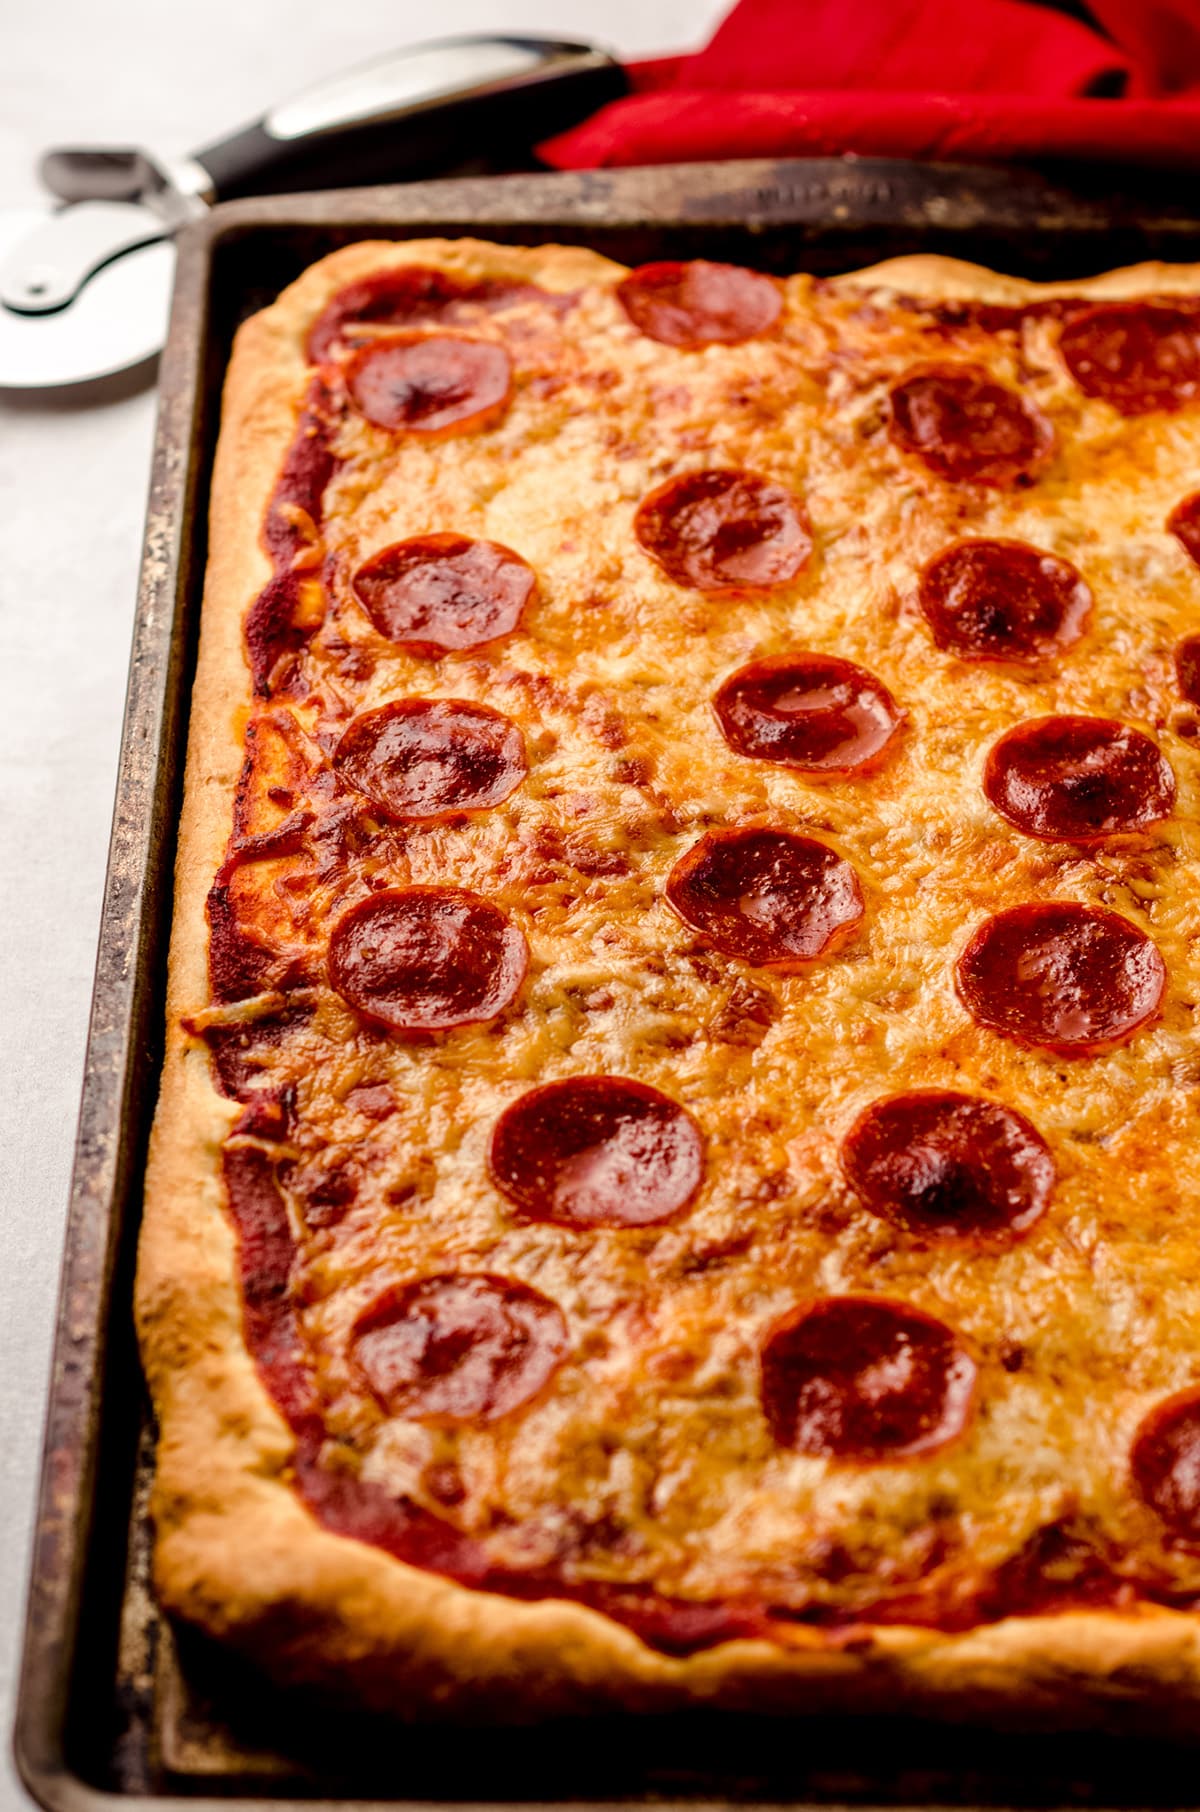 A fully baked rectangle pizza, topped with cheese and pepperoni.